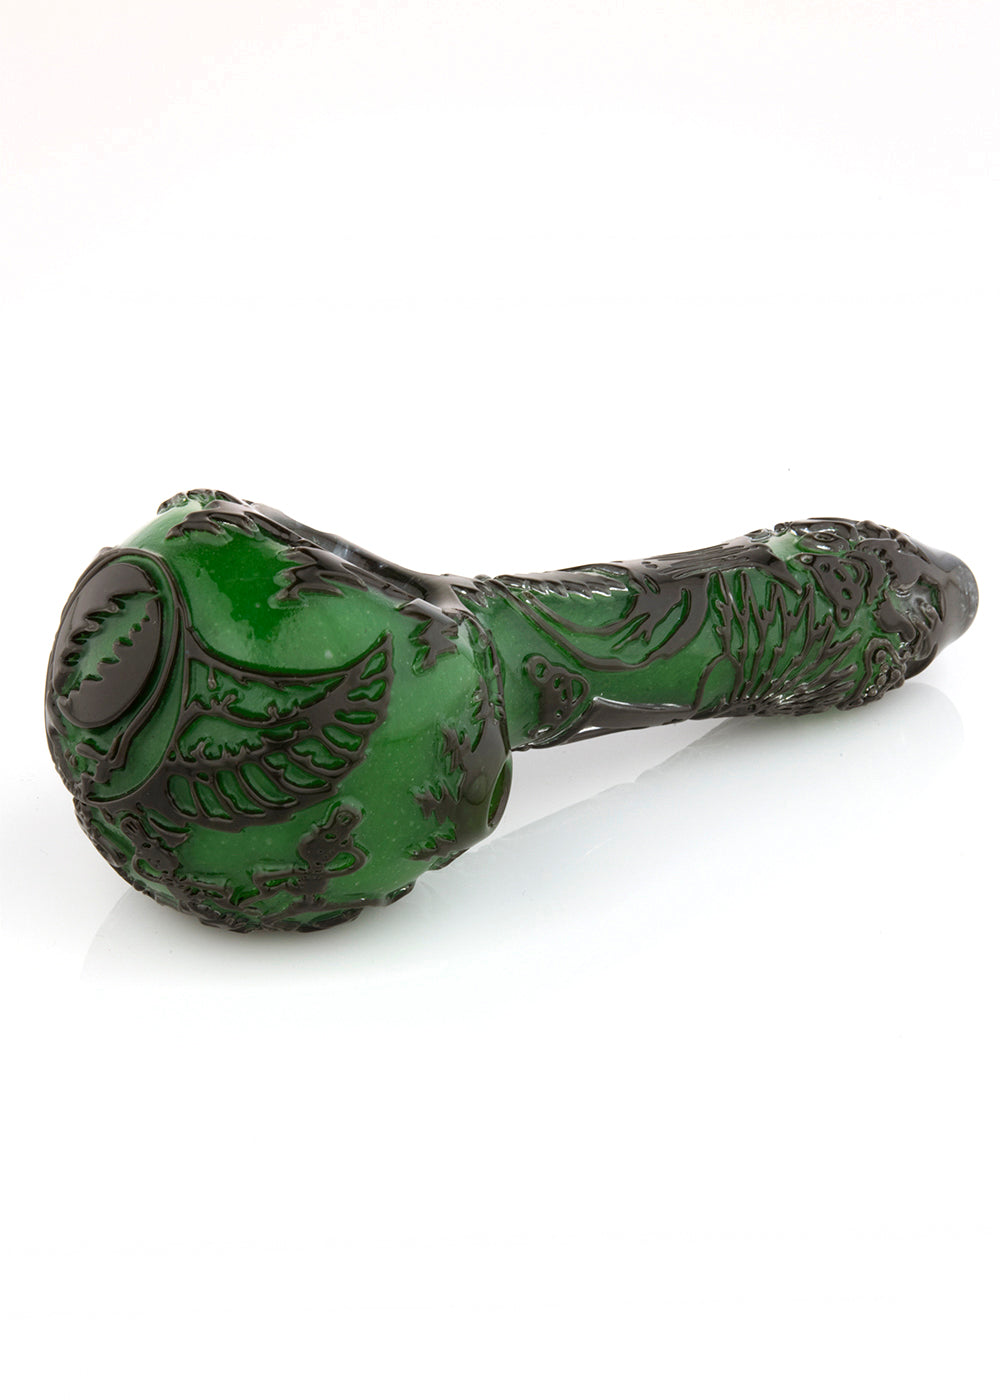 Grateful Dead Frit Over Frit Fire Polished Spoon #1 by Liberty 503